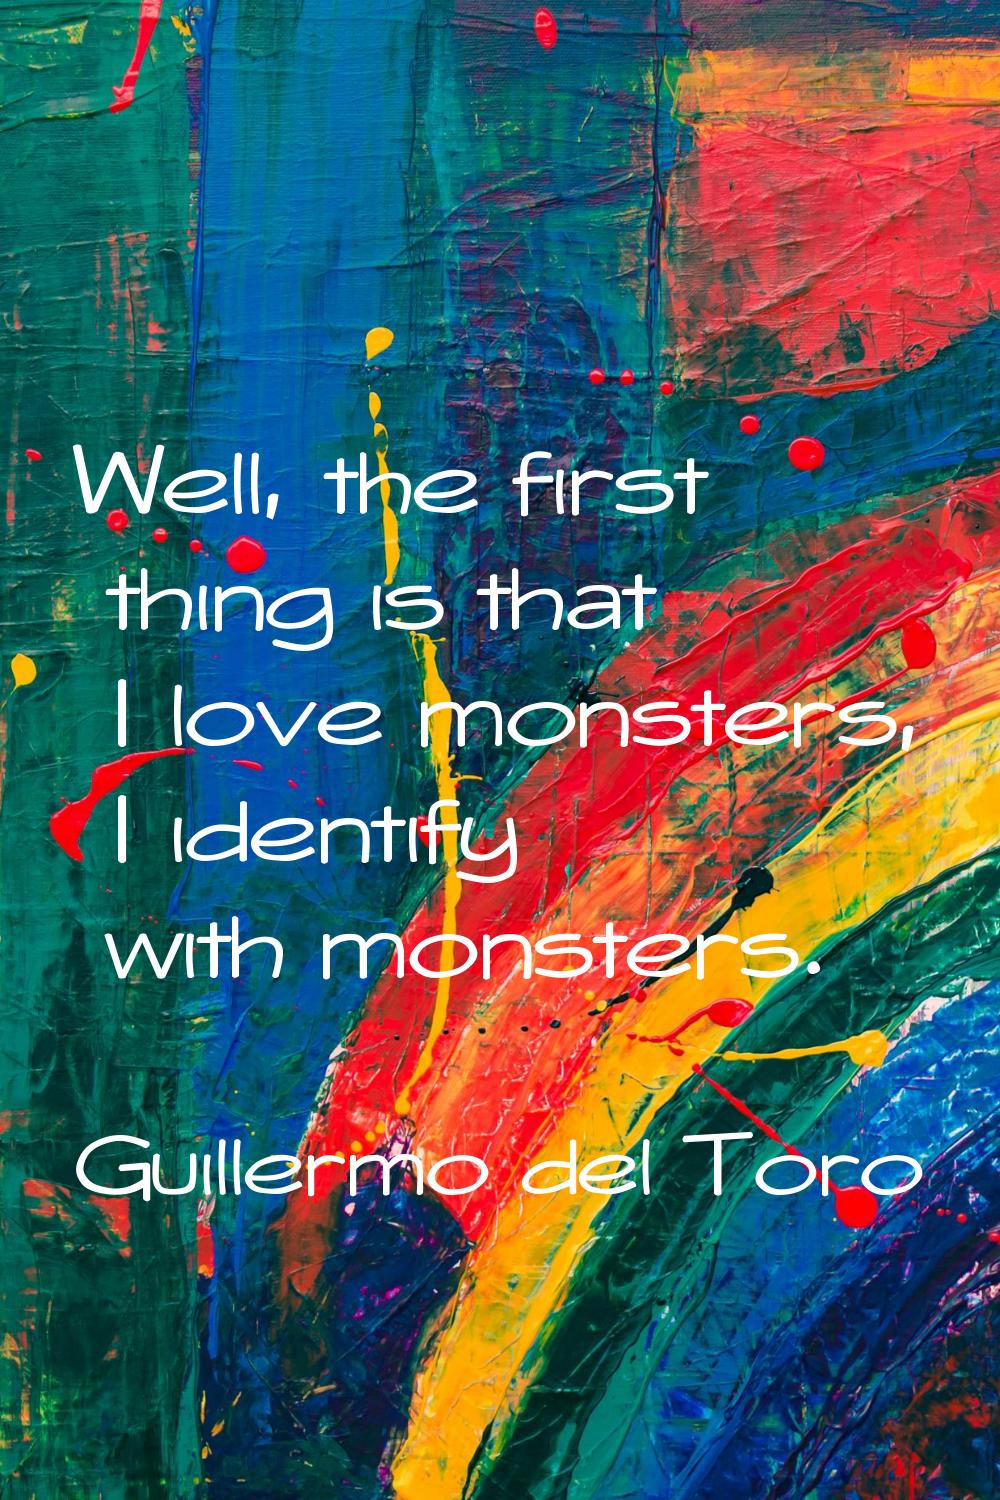 Well, the first thing is that I love monsters, I identify with monsters.